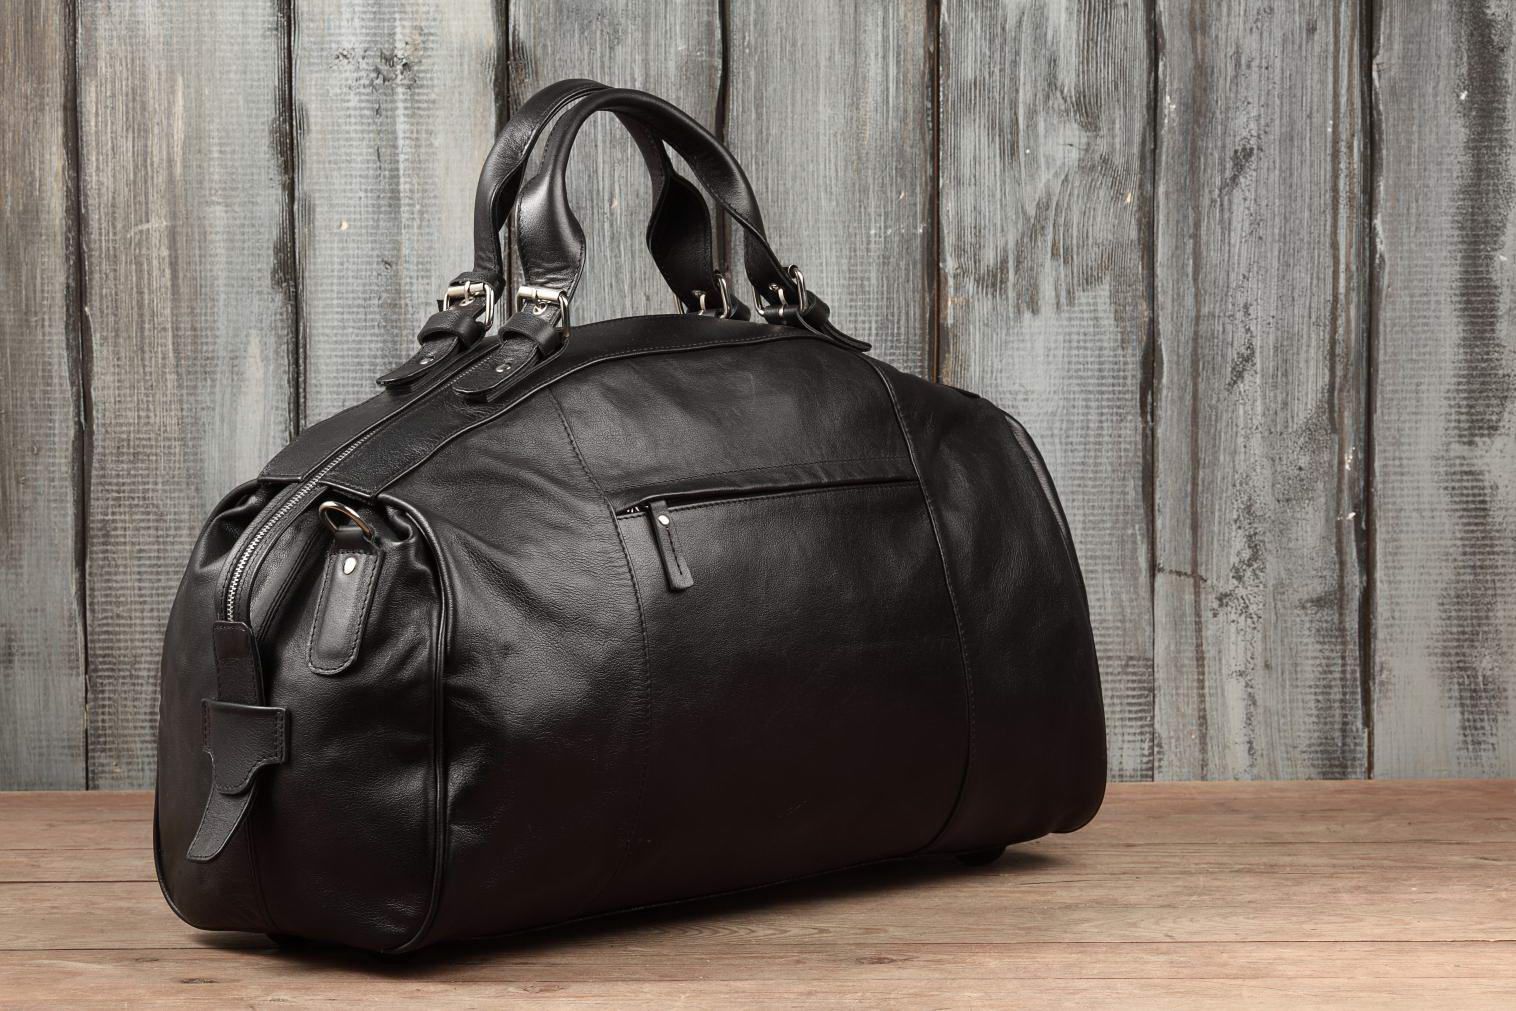 Ranking the best travel bags for 2022